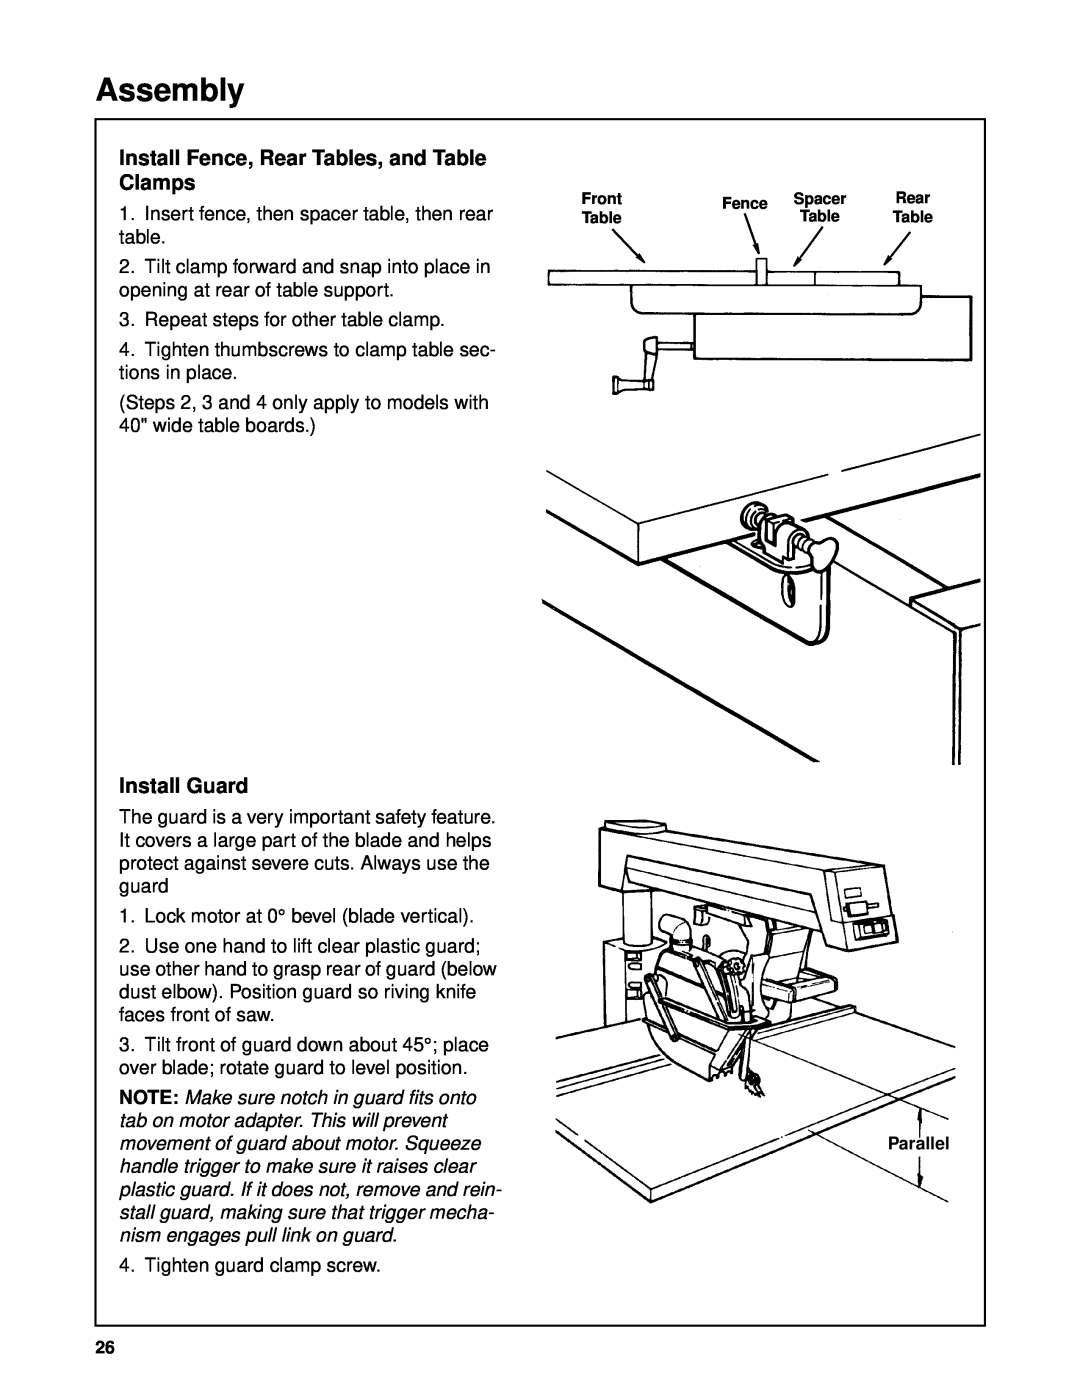 Craftsman 509399, 509398 owner manual Install Fence, Rear Tables, and Table Clamps, Install Guard, Assembly 